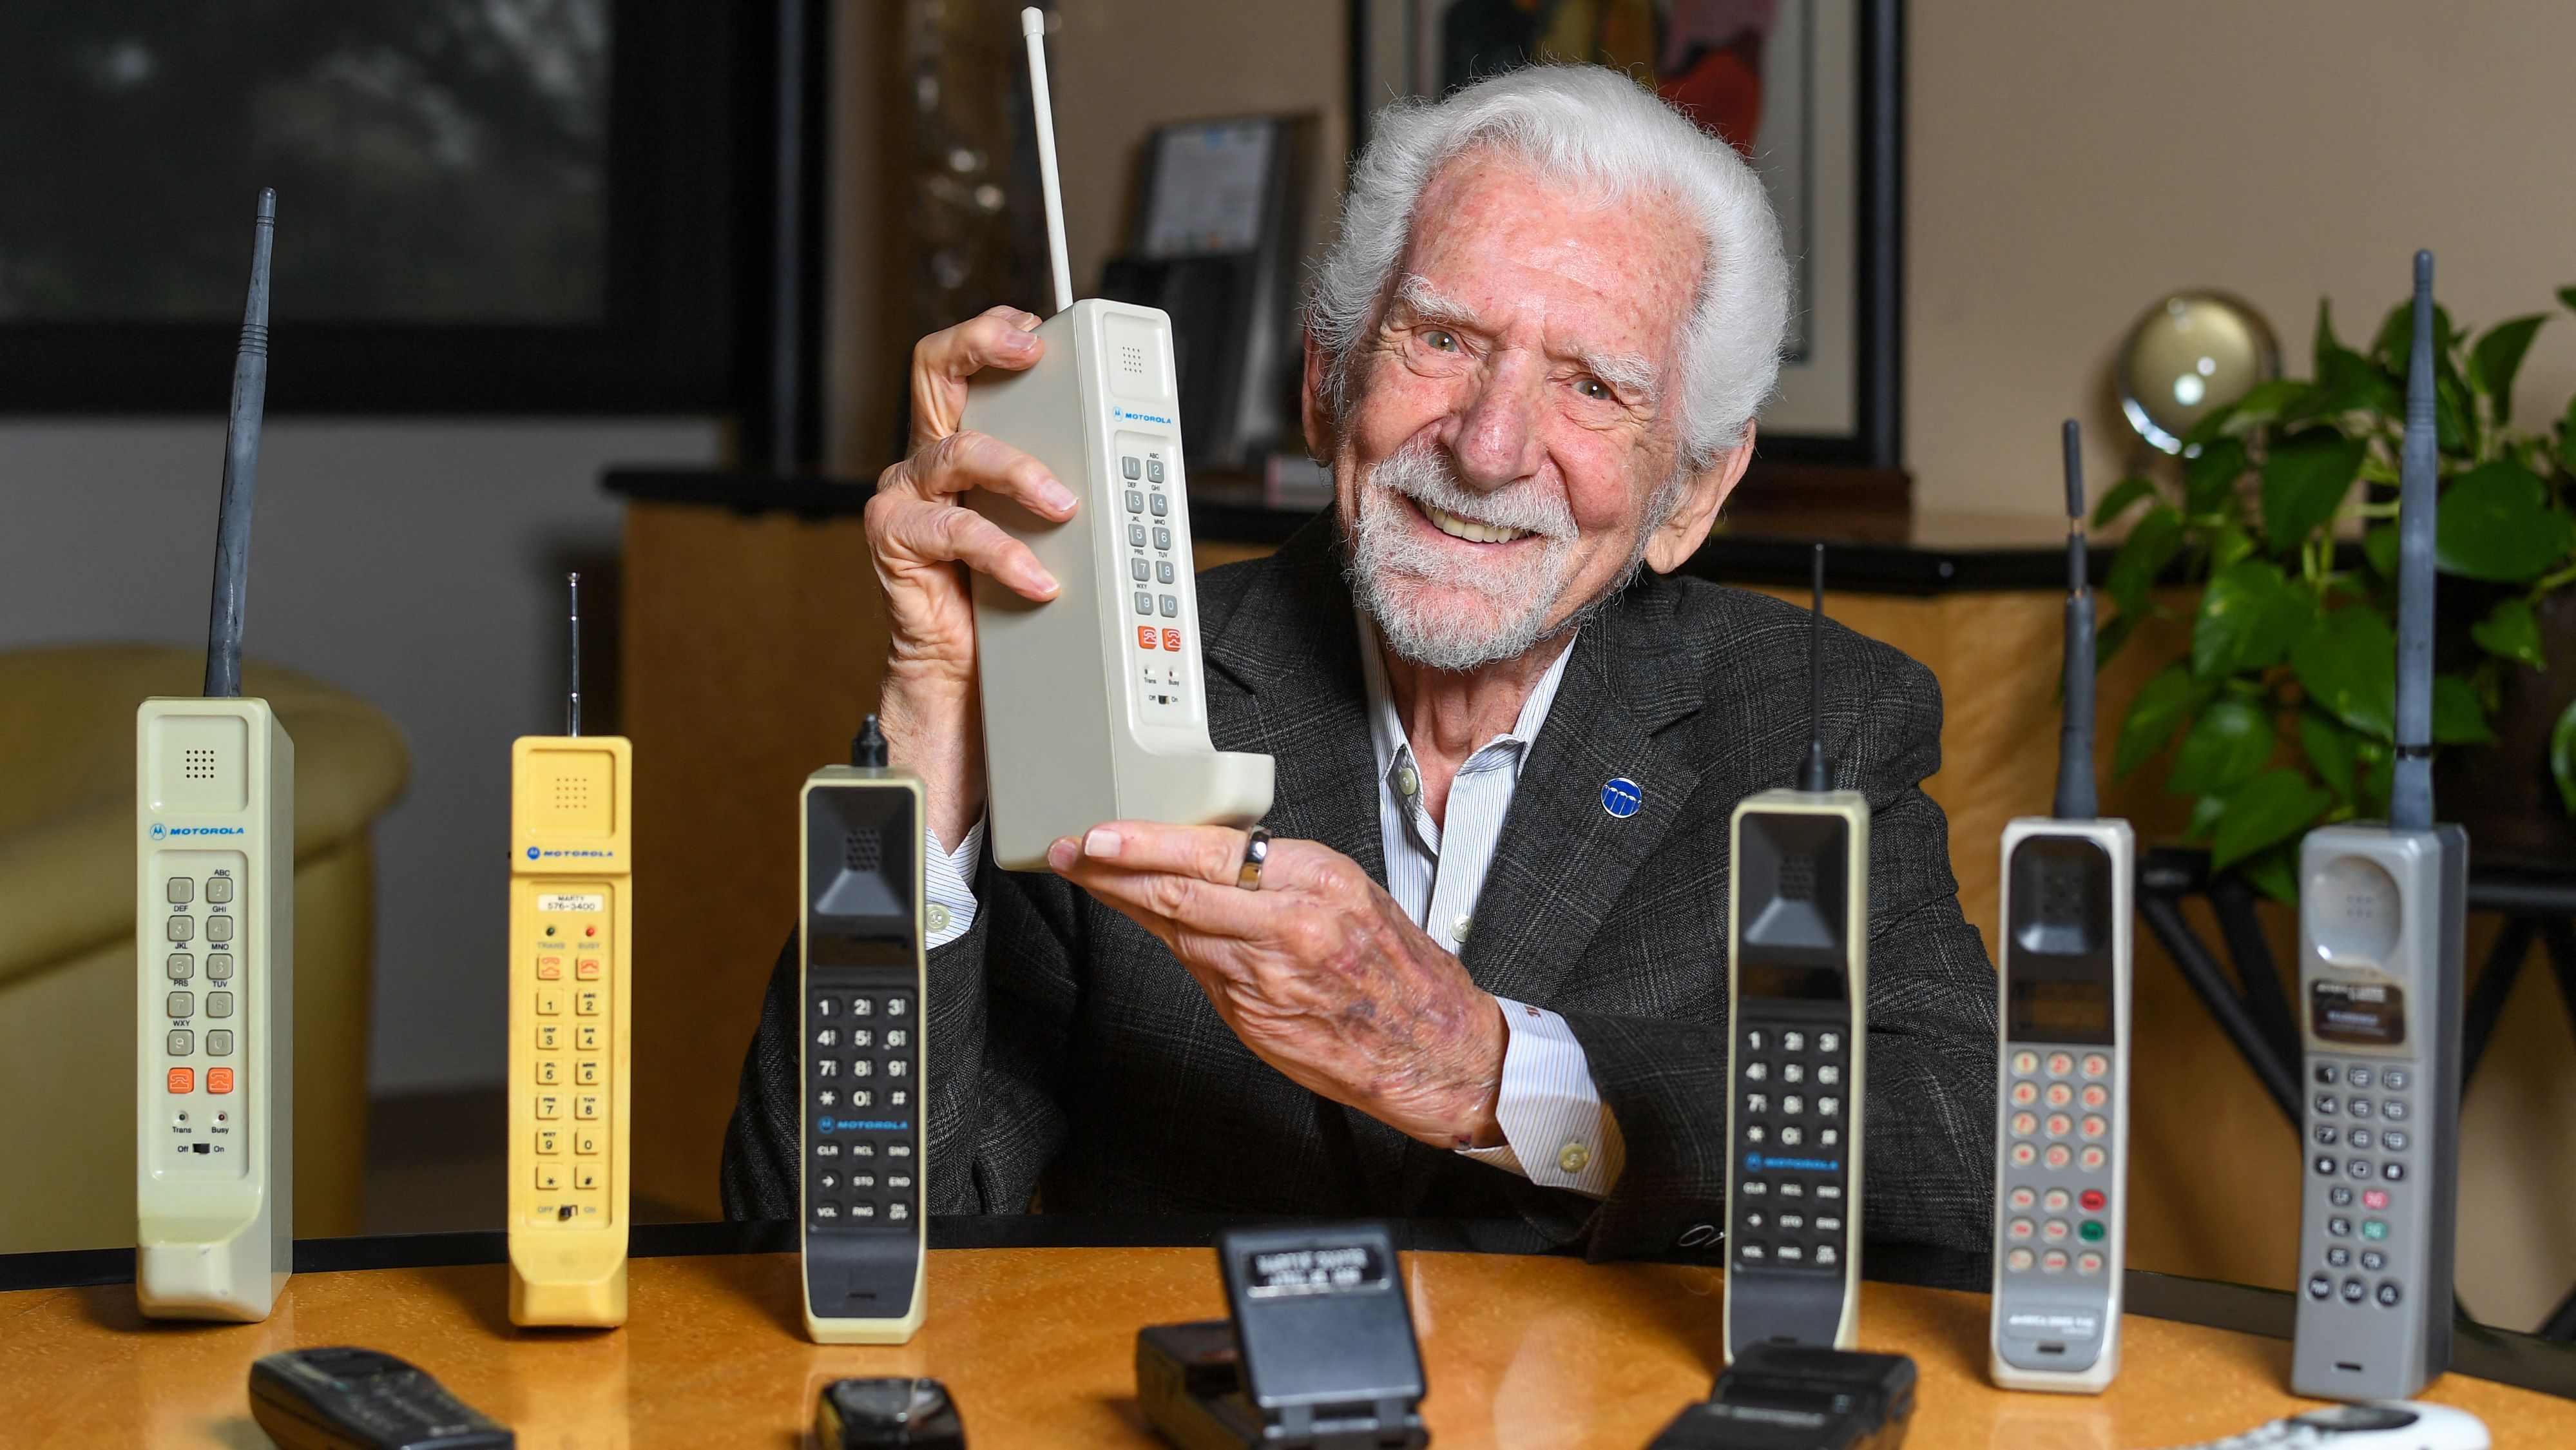 Engineer Martin Cooper holds a copy of the mobile phone he used to make the first cell call to his competitor 50 years ago. /Valerie Macon/AFP